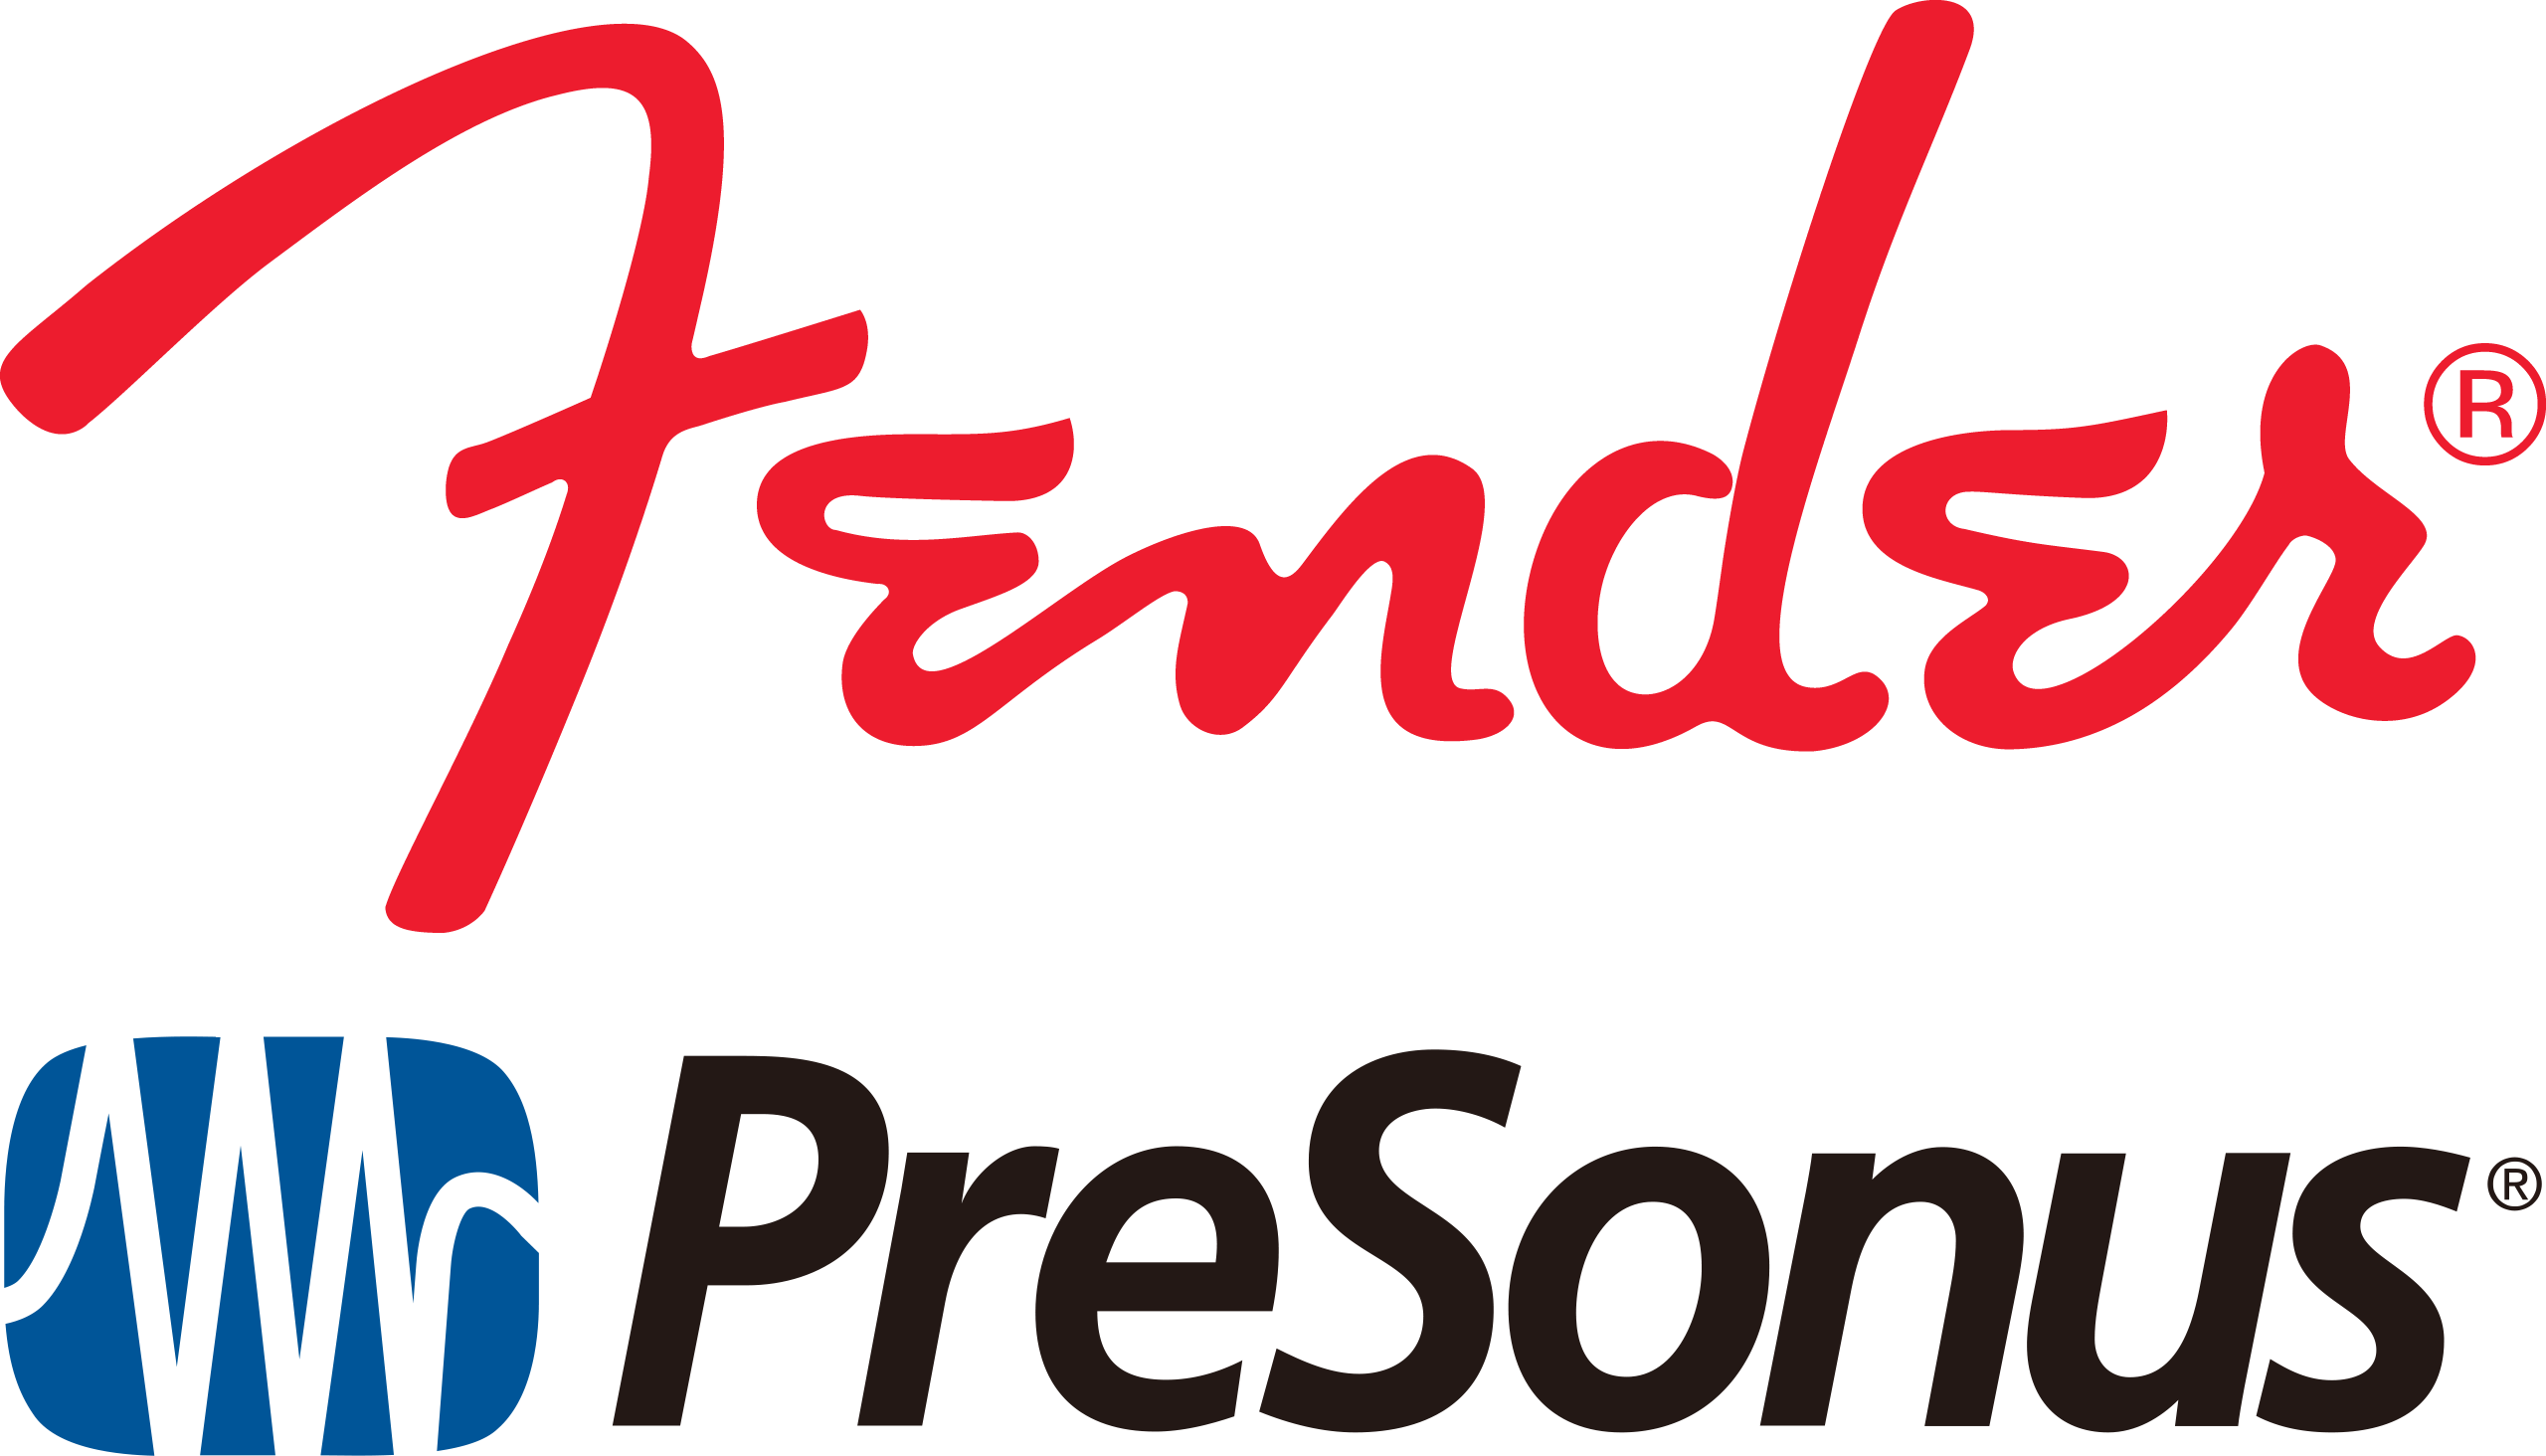 Fender acquires PreSonus as they continue to integrate software into their iconic hardware